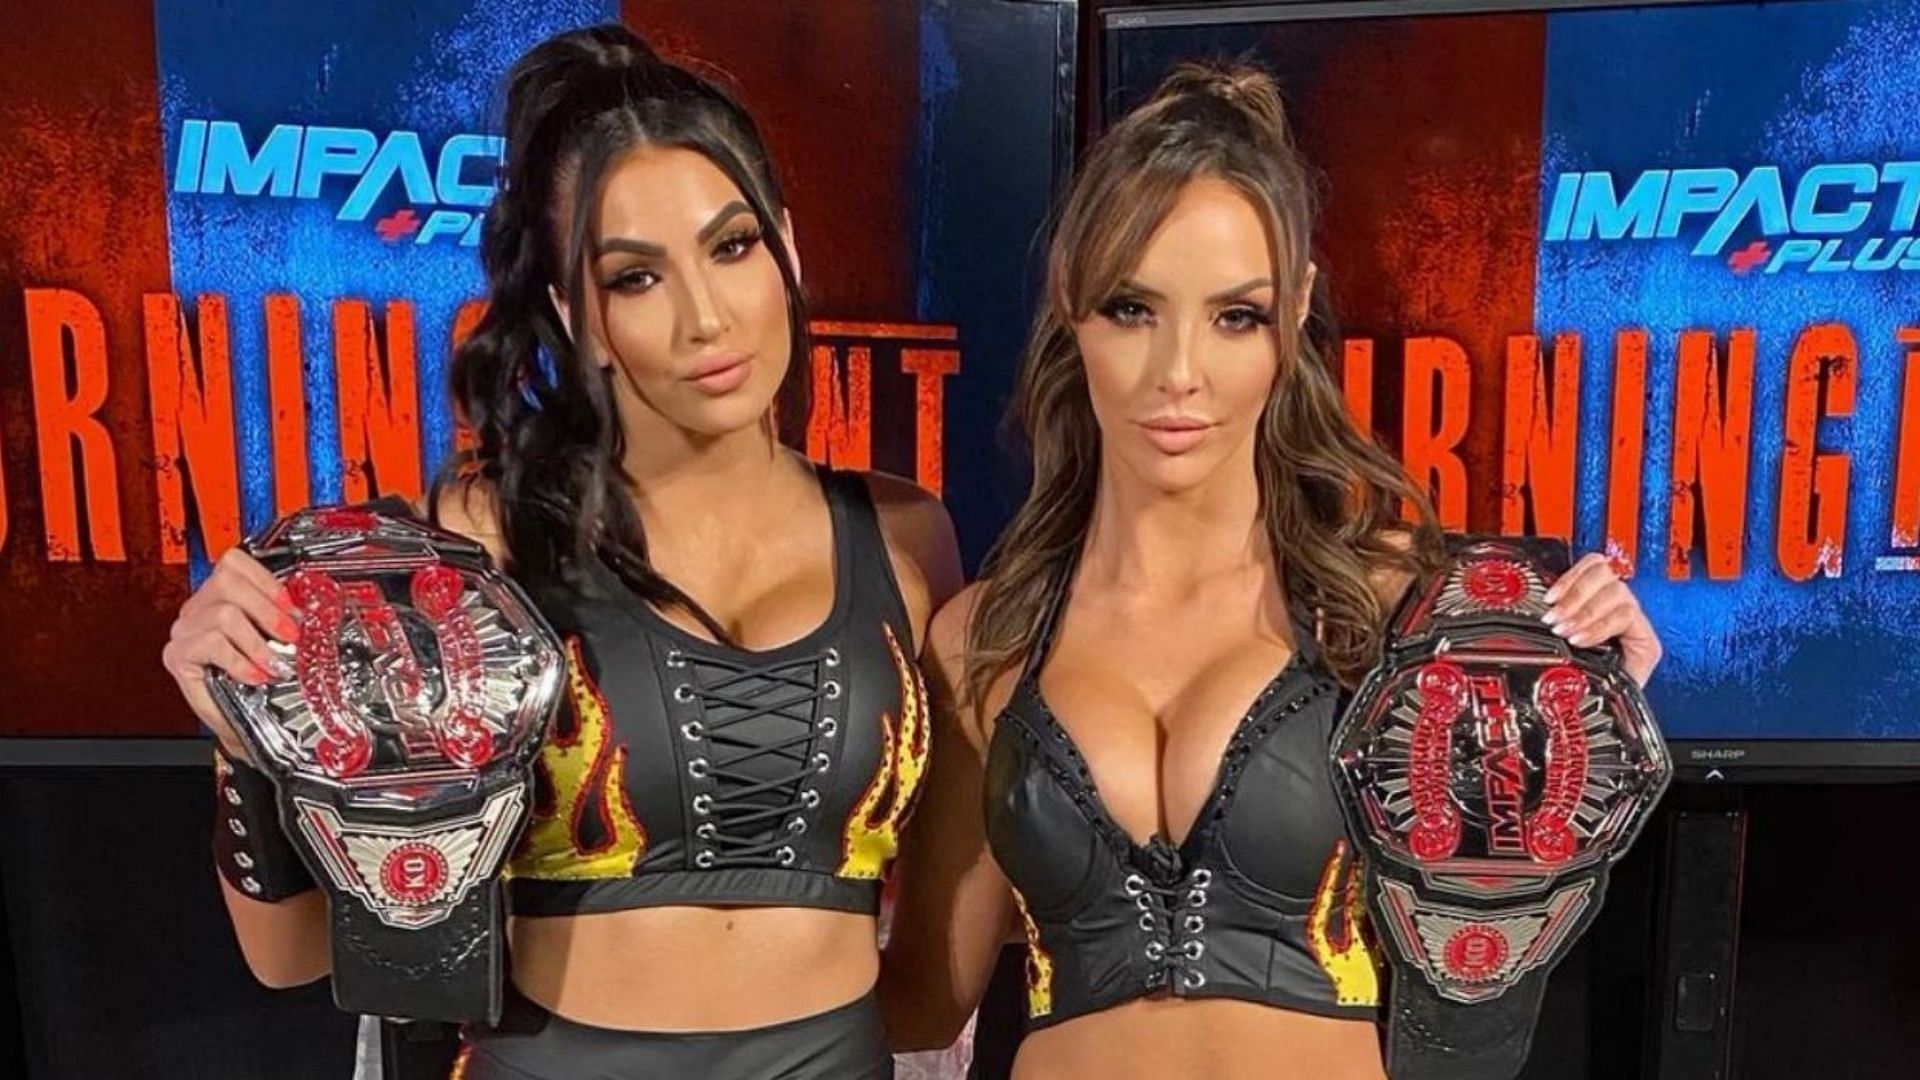 The former Knockouts tag champs have announced their departure